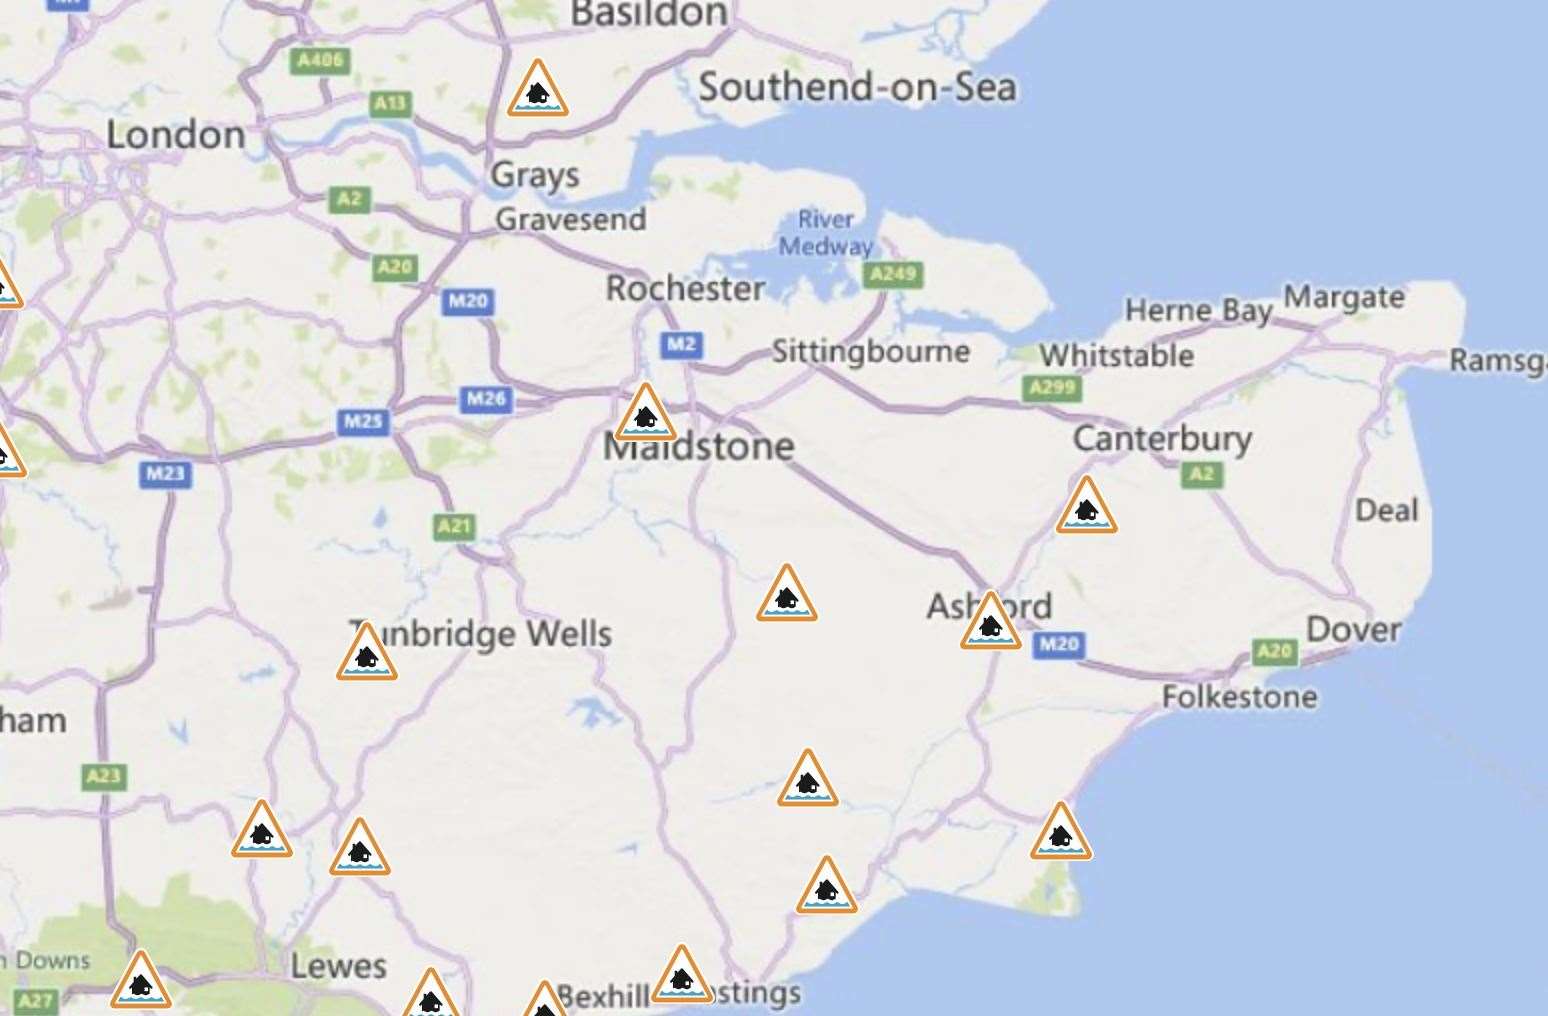 Flood alerts are active in parts of the county. Picture: UK Government